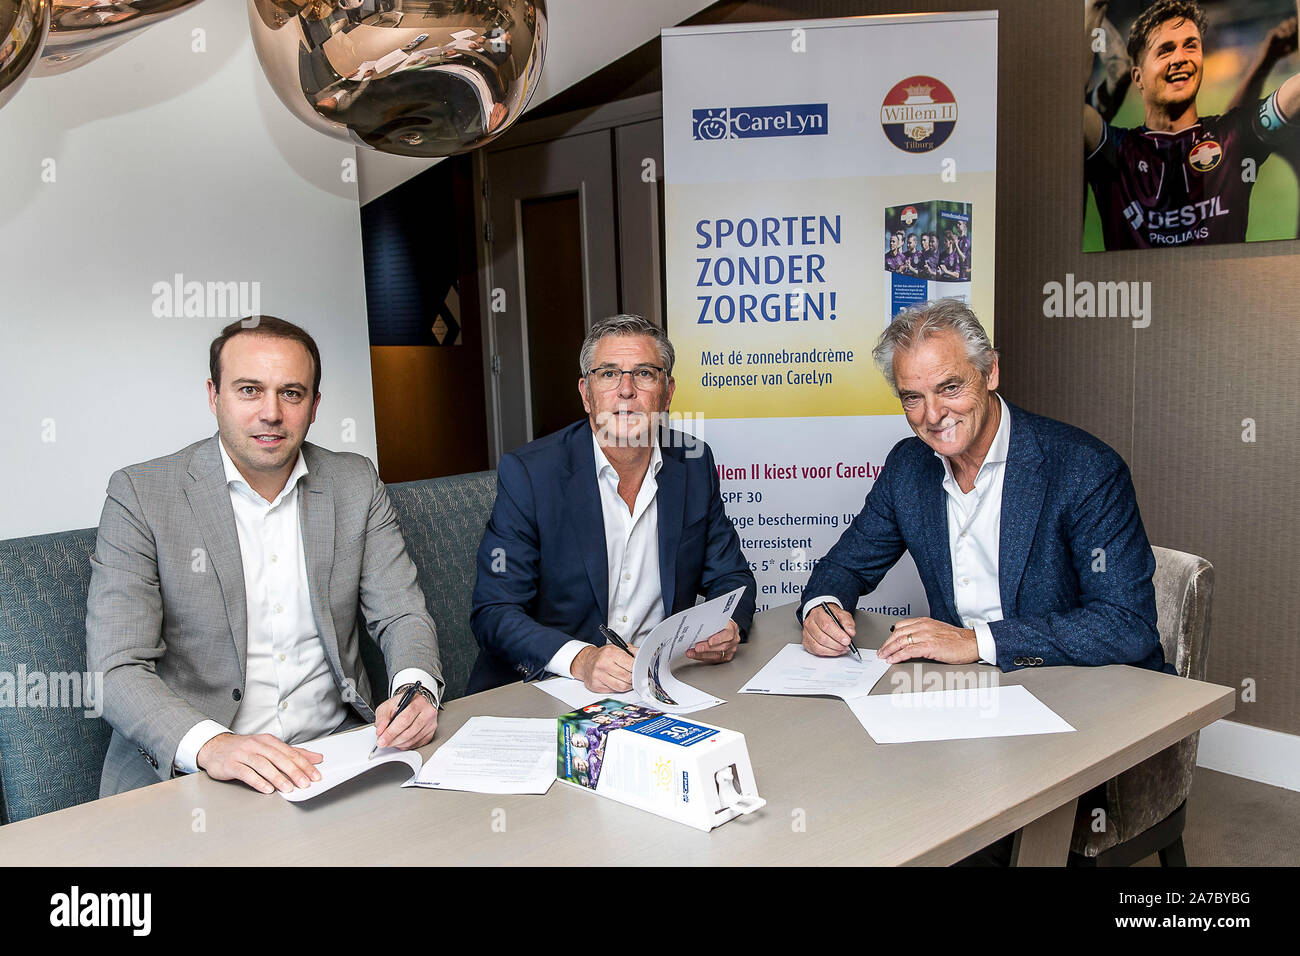 Tilburg - CareLyn 31-10-2019. Koning Willem II stadion. Buitensport, Voetbal. Willem II is the first BVO that concerns about skin cancer and signs a contract with CareLyn. Joris Mathijsen, Martin van Geel, Rene van der Kolk. Credit: Pro Shots/Alamy Live News Stock Photo